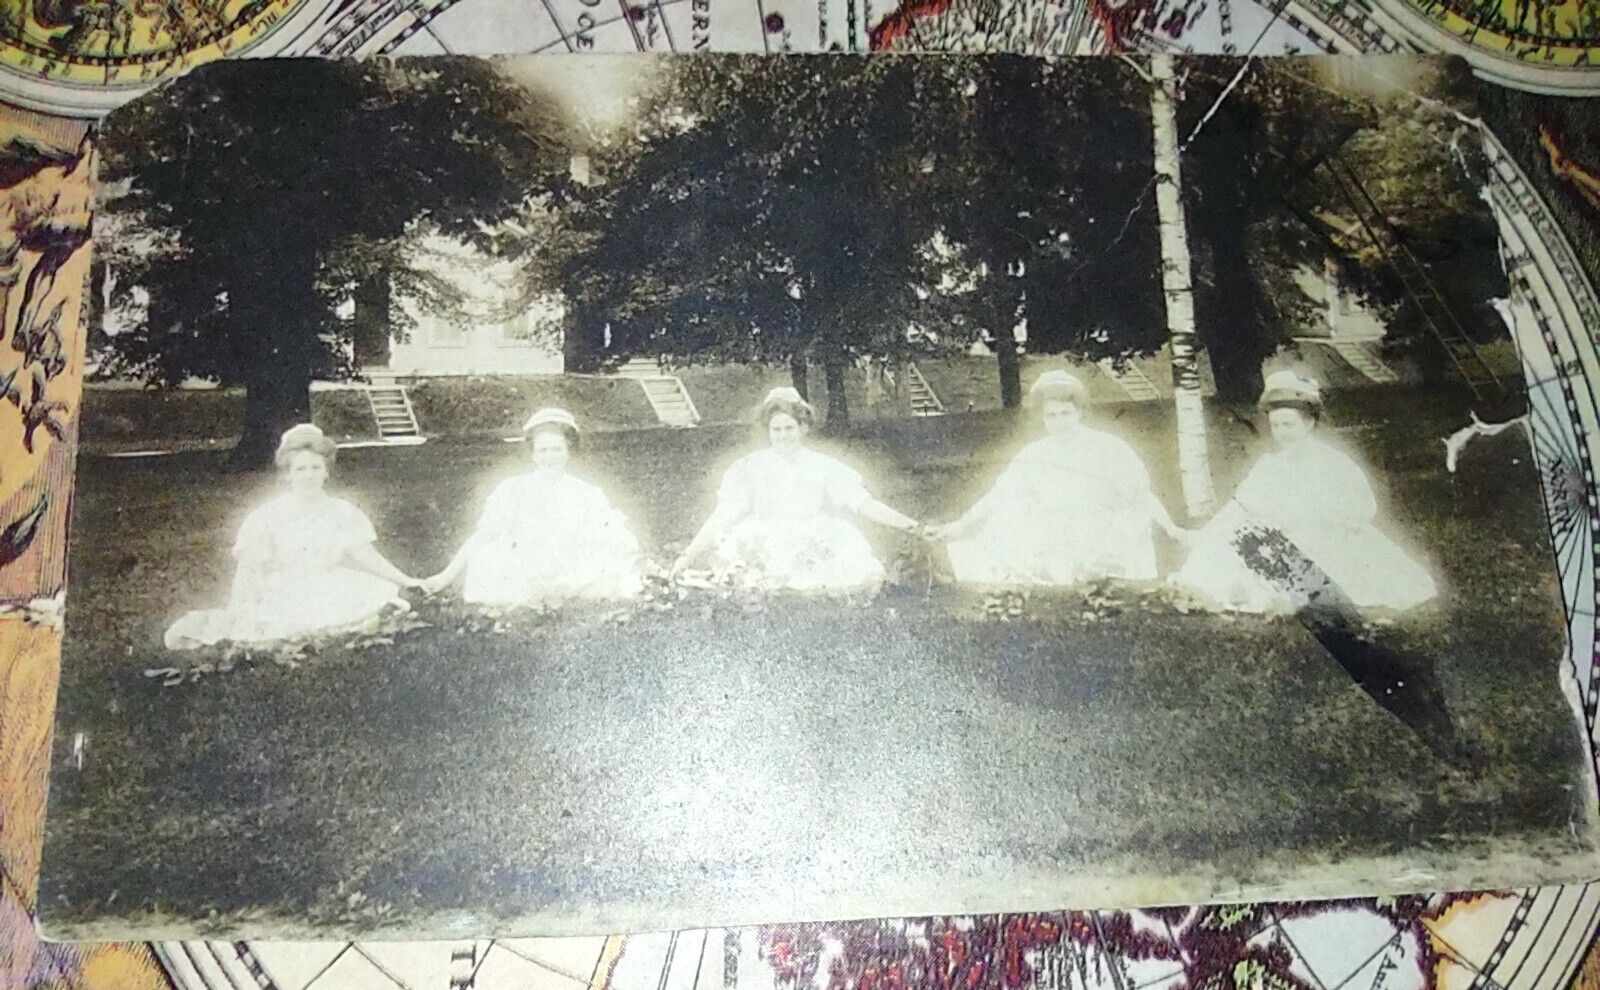 RARE SPOOKY AND EERIE RPPC OF FIVE GHOSTLY LOOKING WOMEN HOLDING HANDS ON LAWN.